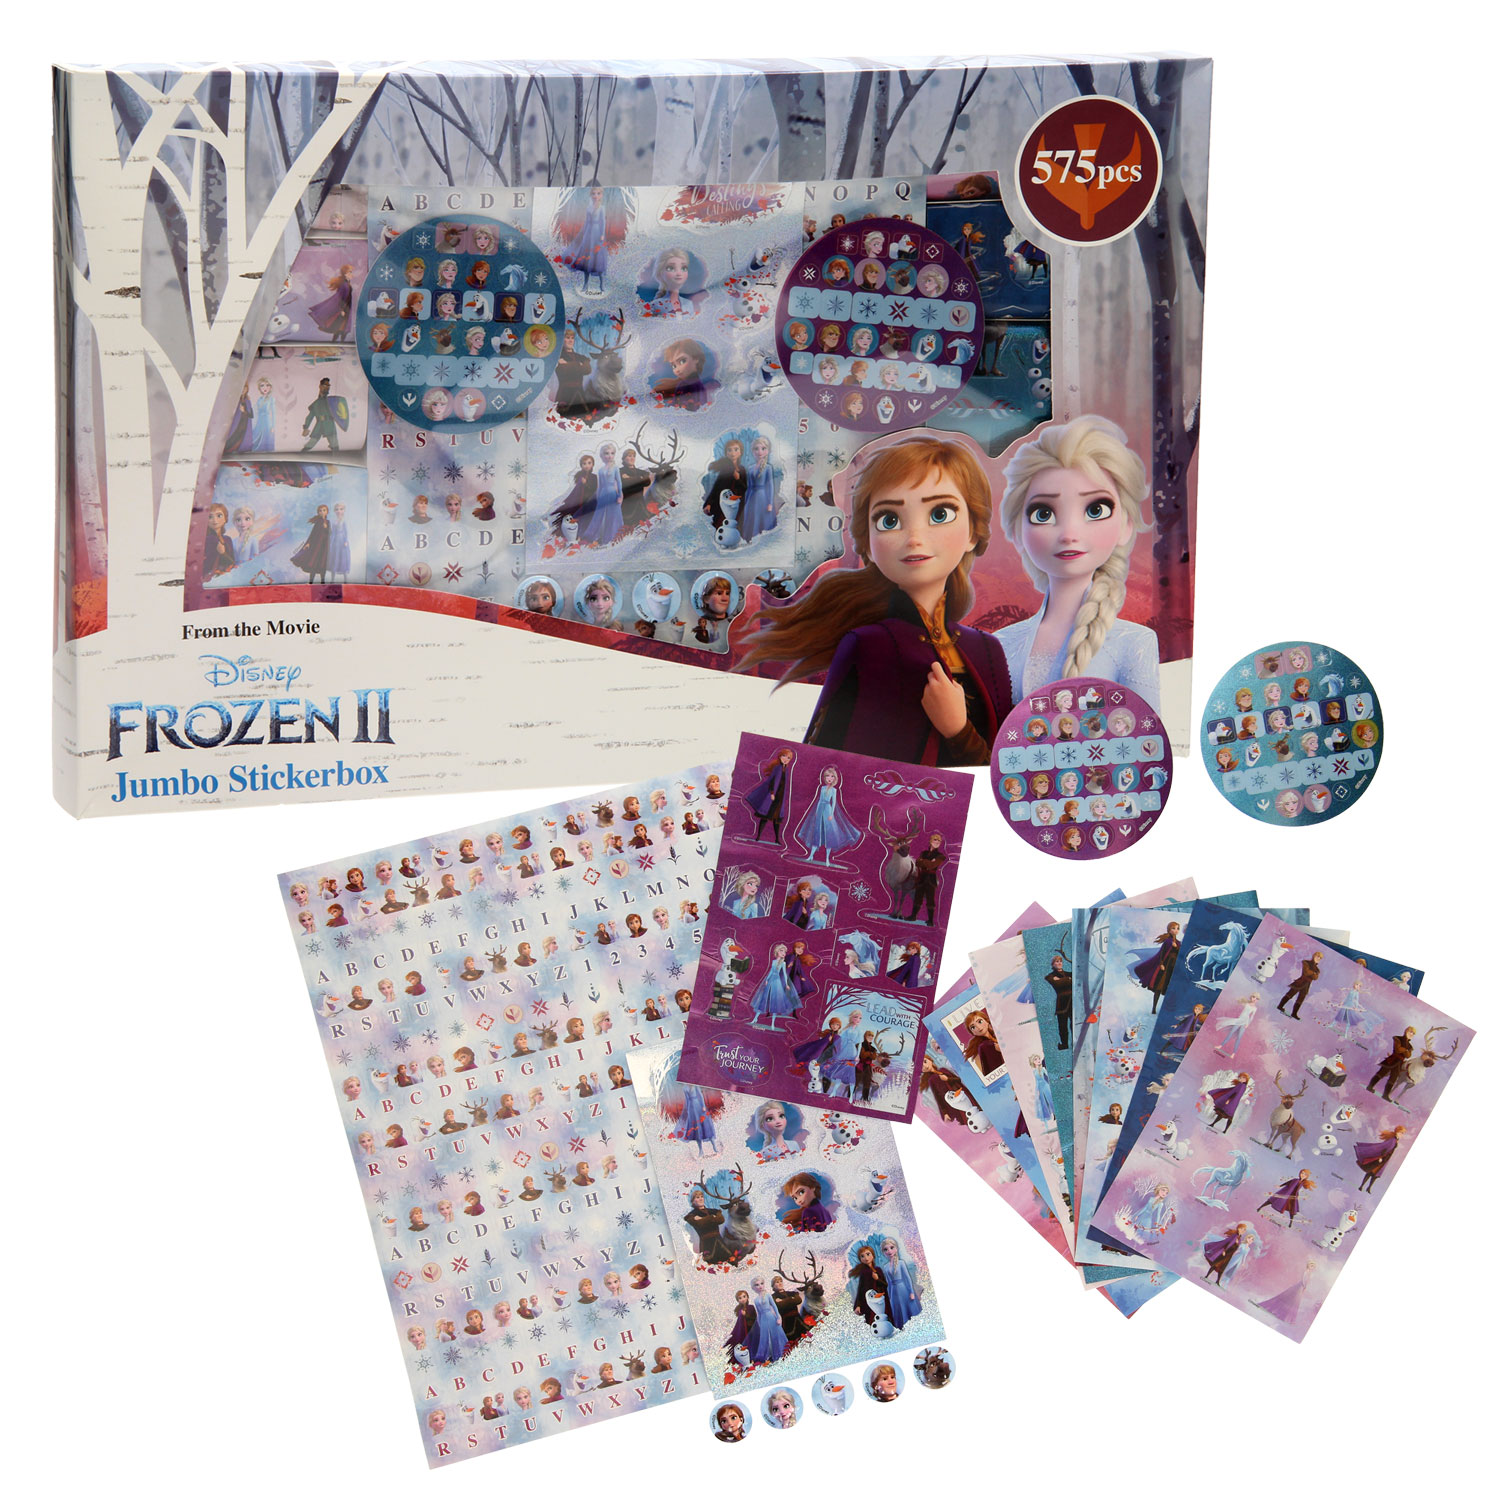  Disney Frozen II Large Sticker Box with Over 1800